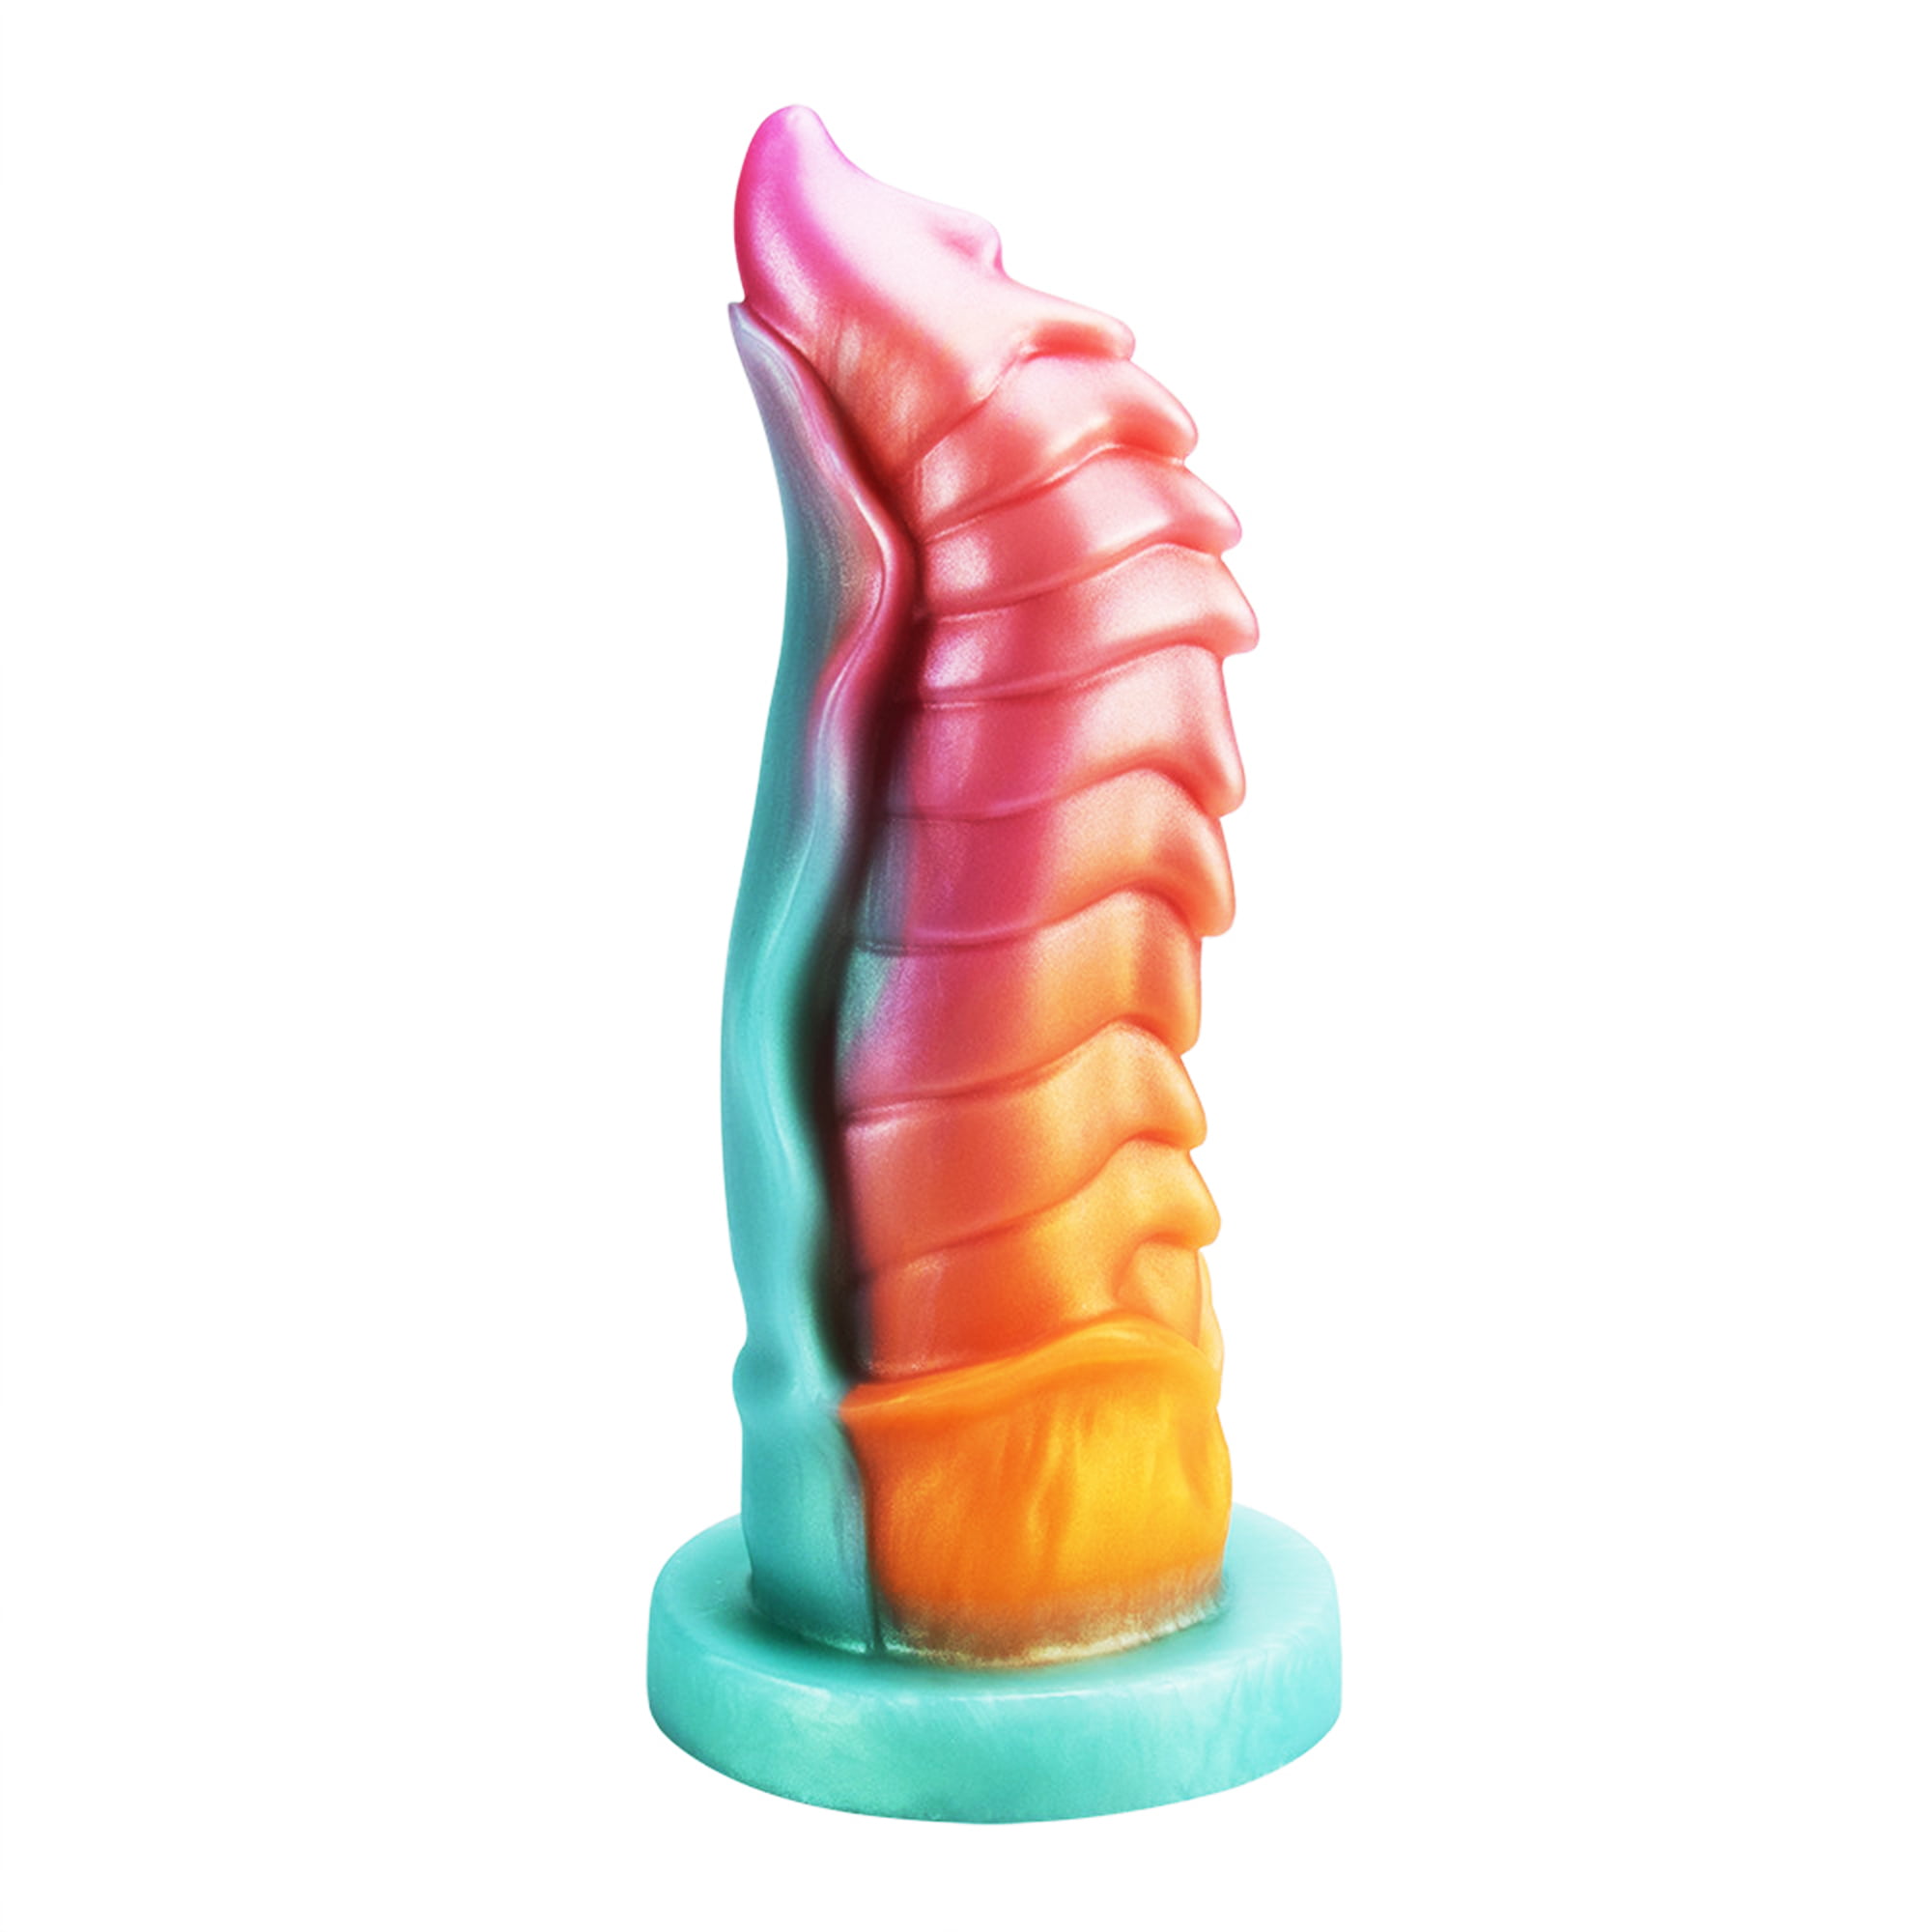 8.8 Inch Dildos Sex Toys Tentacle Adult Toy with Suction Cup for Hands-free Play Big Thick G Spot Stimulator for Women and Men Anal Play